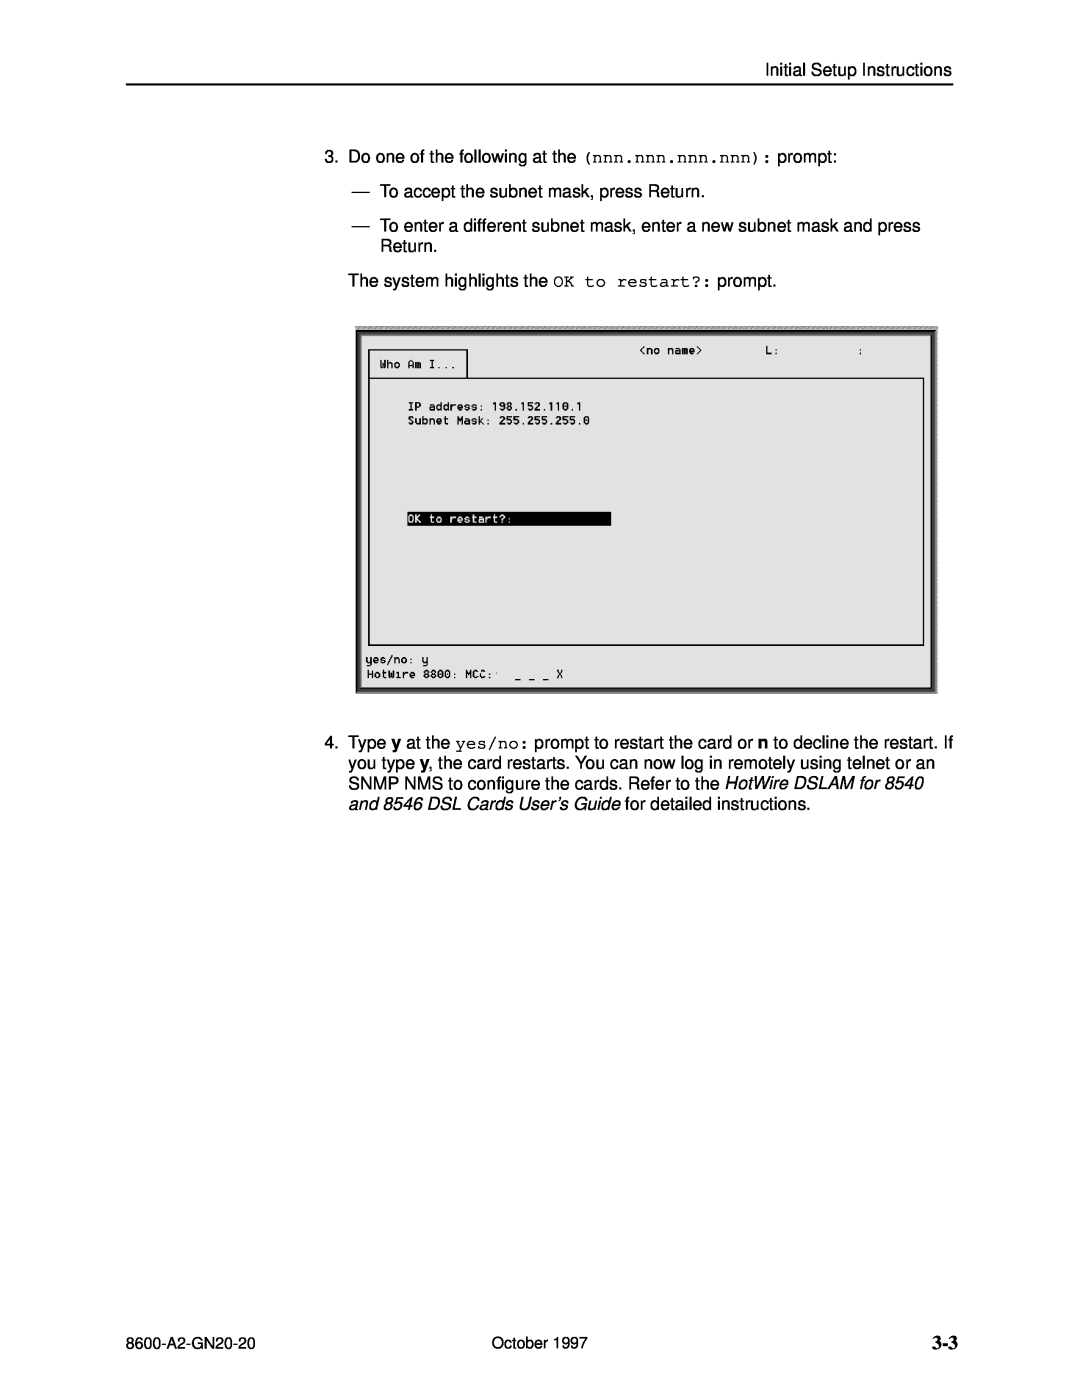 Nortel Networks 8600 manual Initial Setup Instructions 